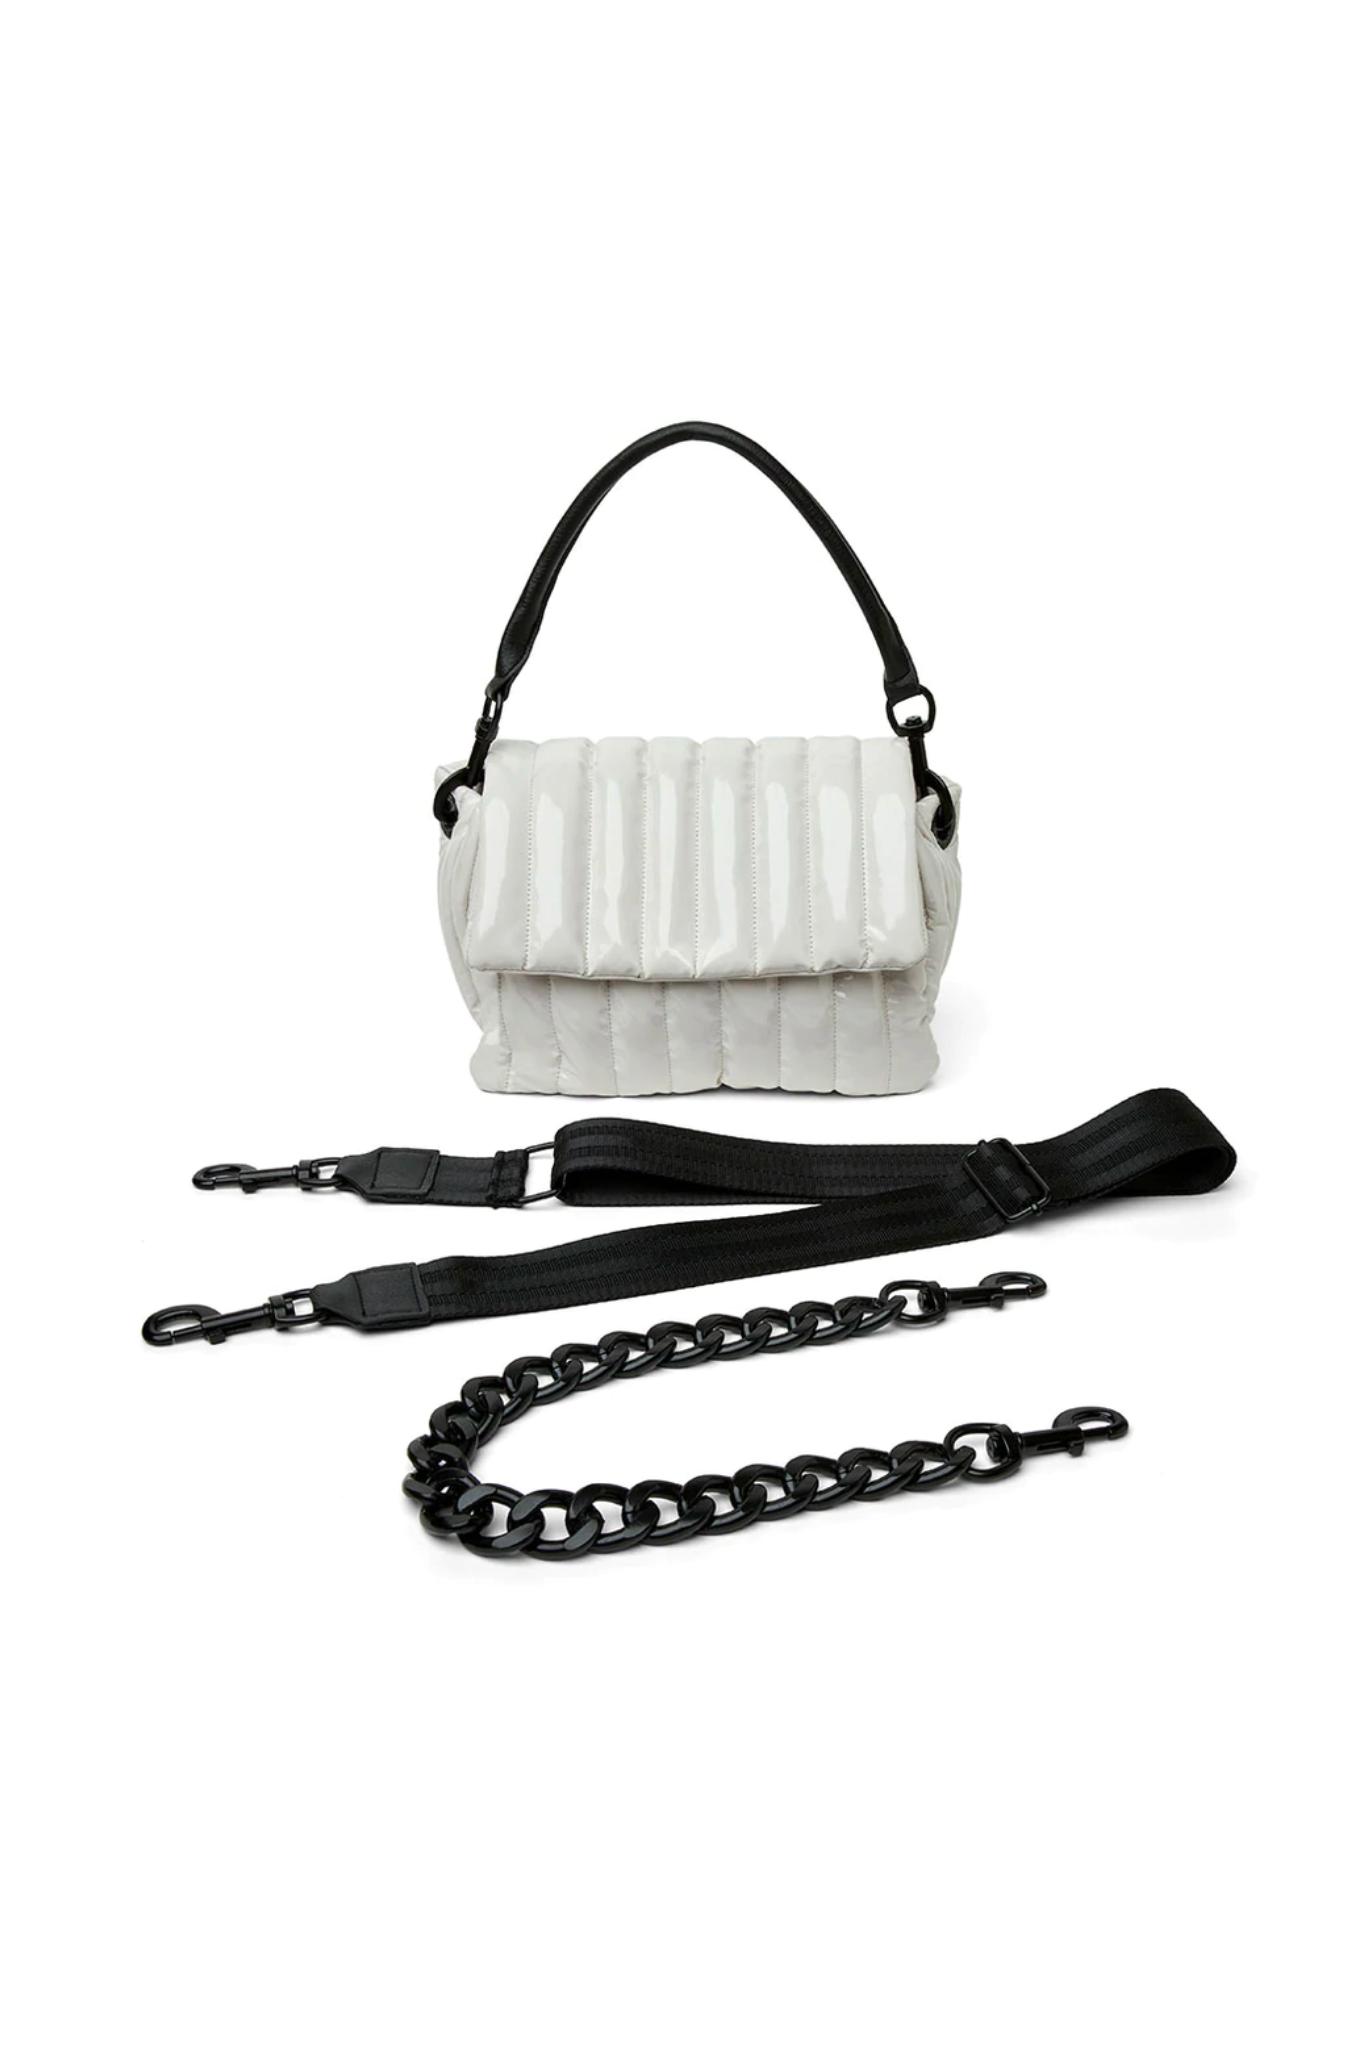 THINK ROYLN, Bags, New Think Royln Cloud Bag In Pearl Cashmere